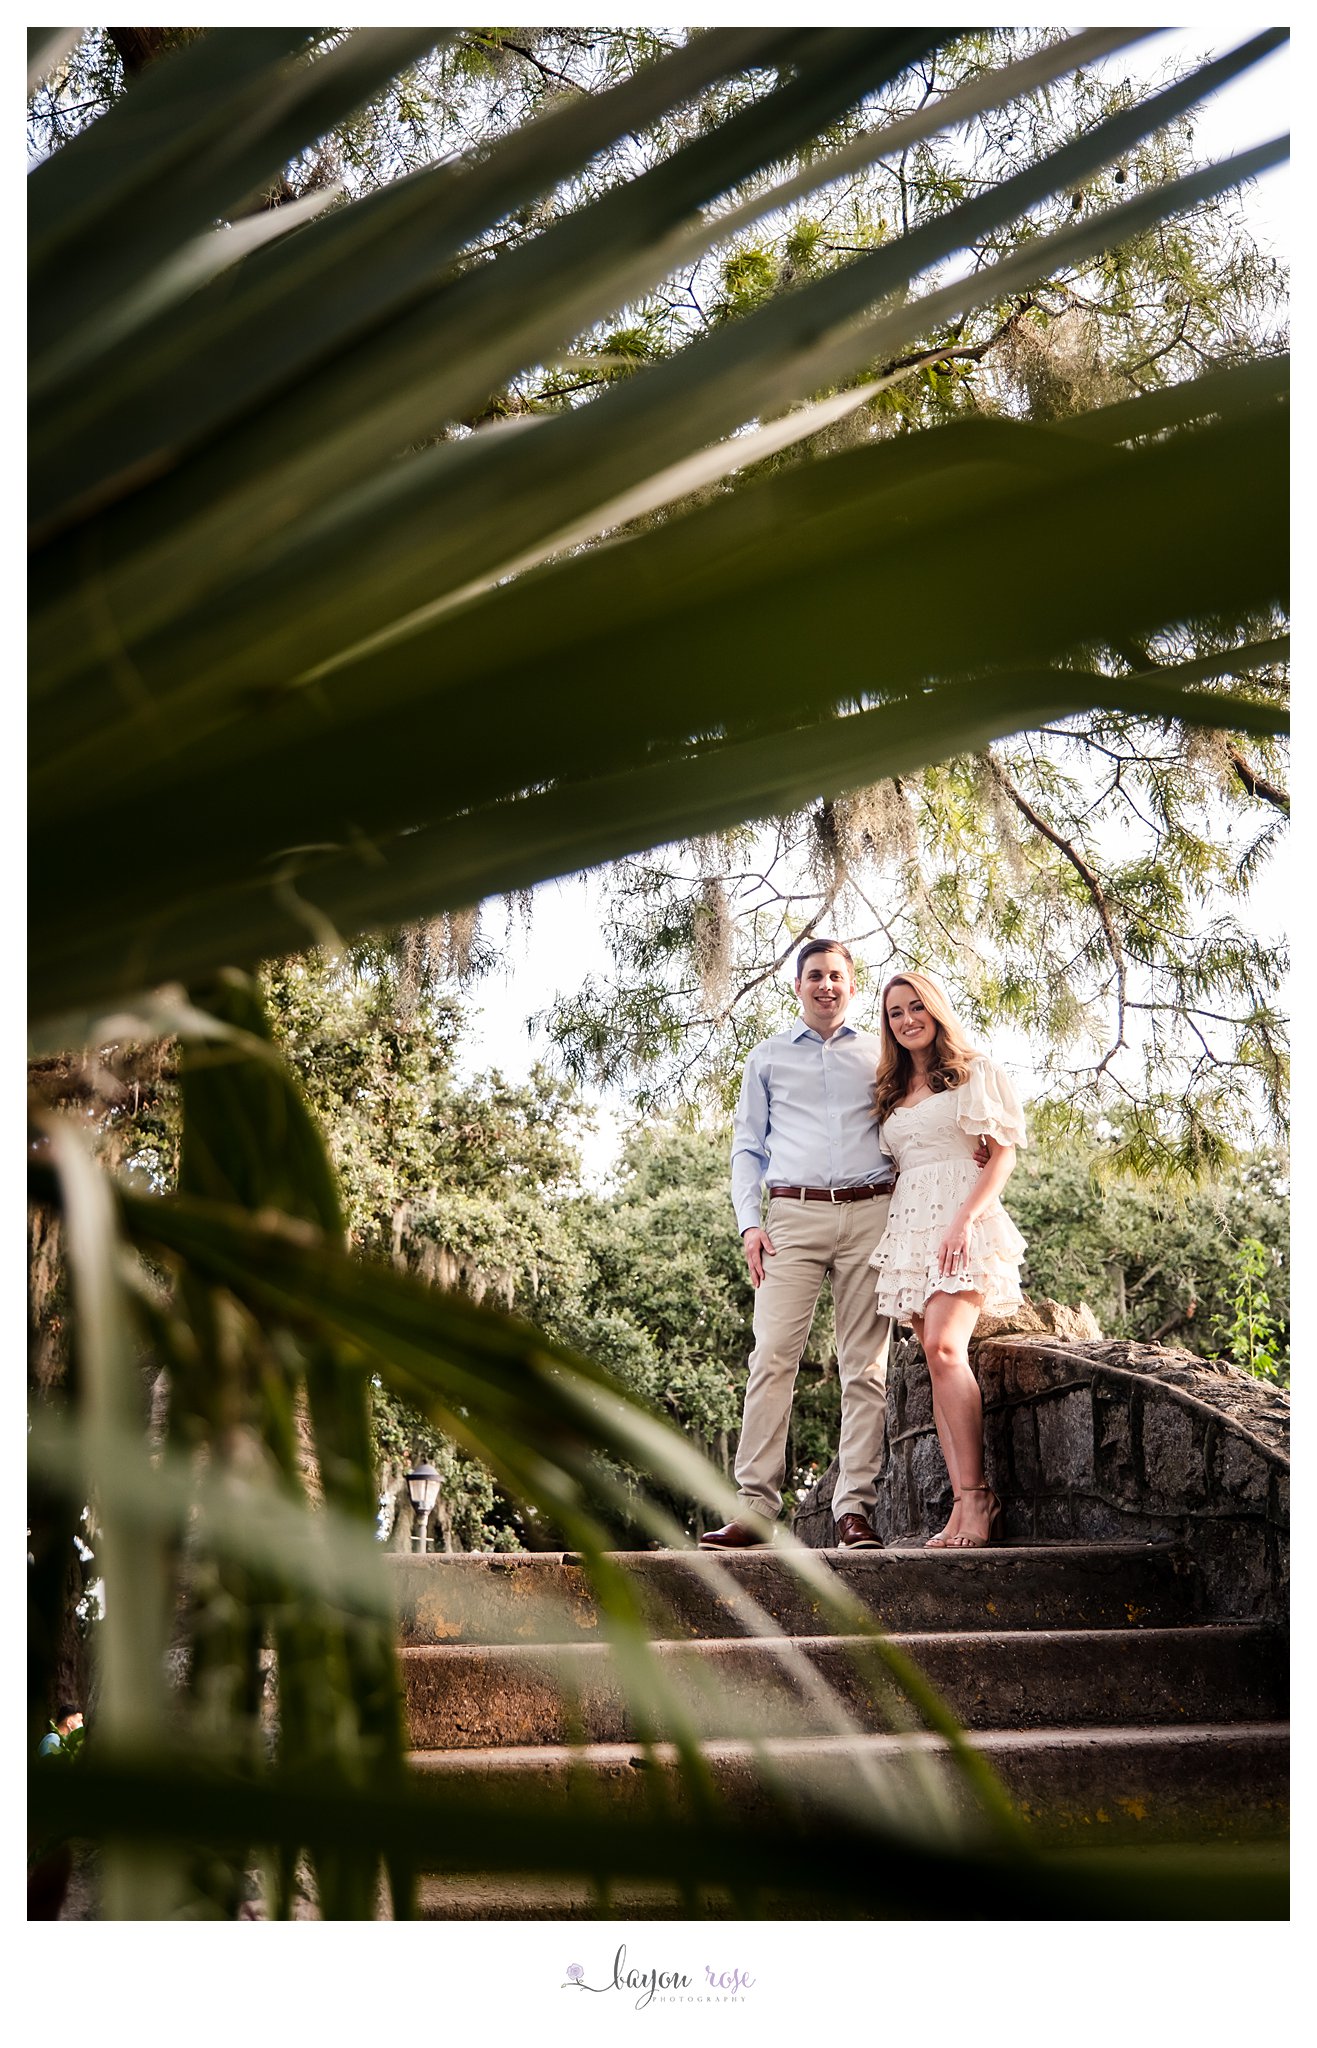 engagement photo in City Park New Orleans through palm fronds